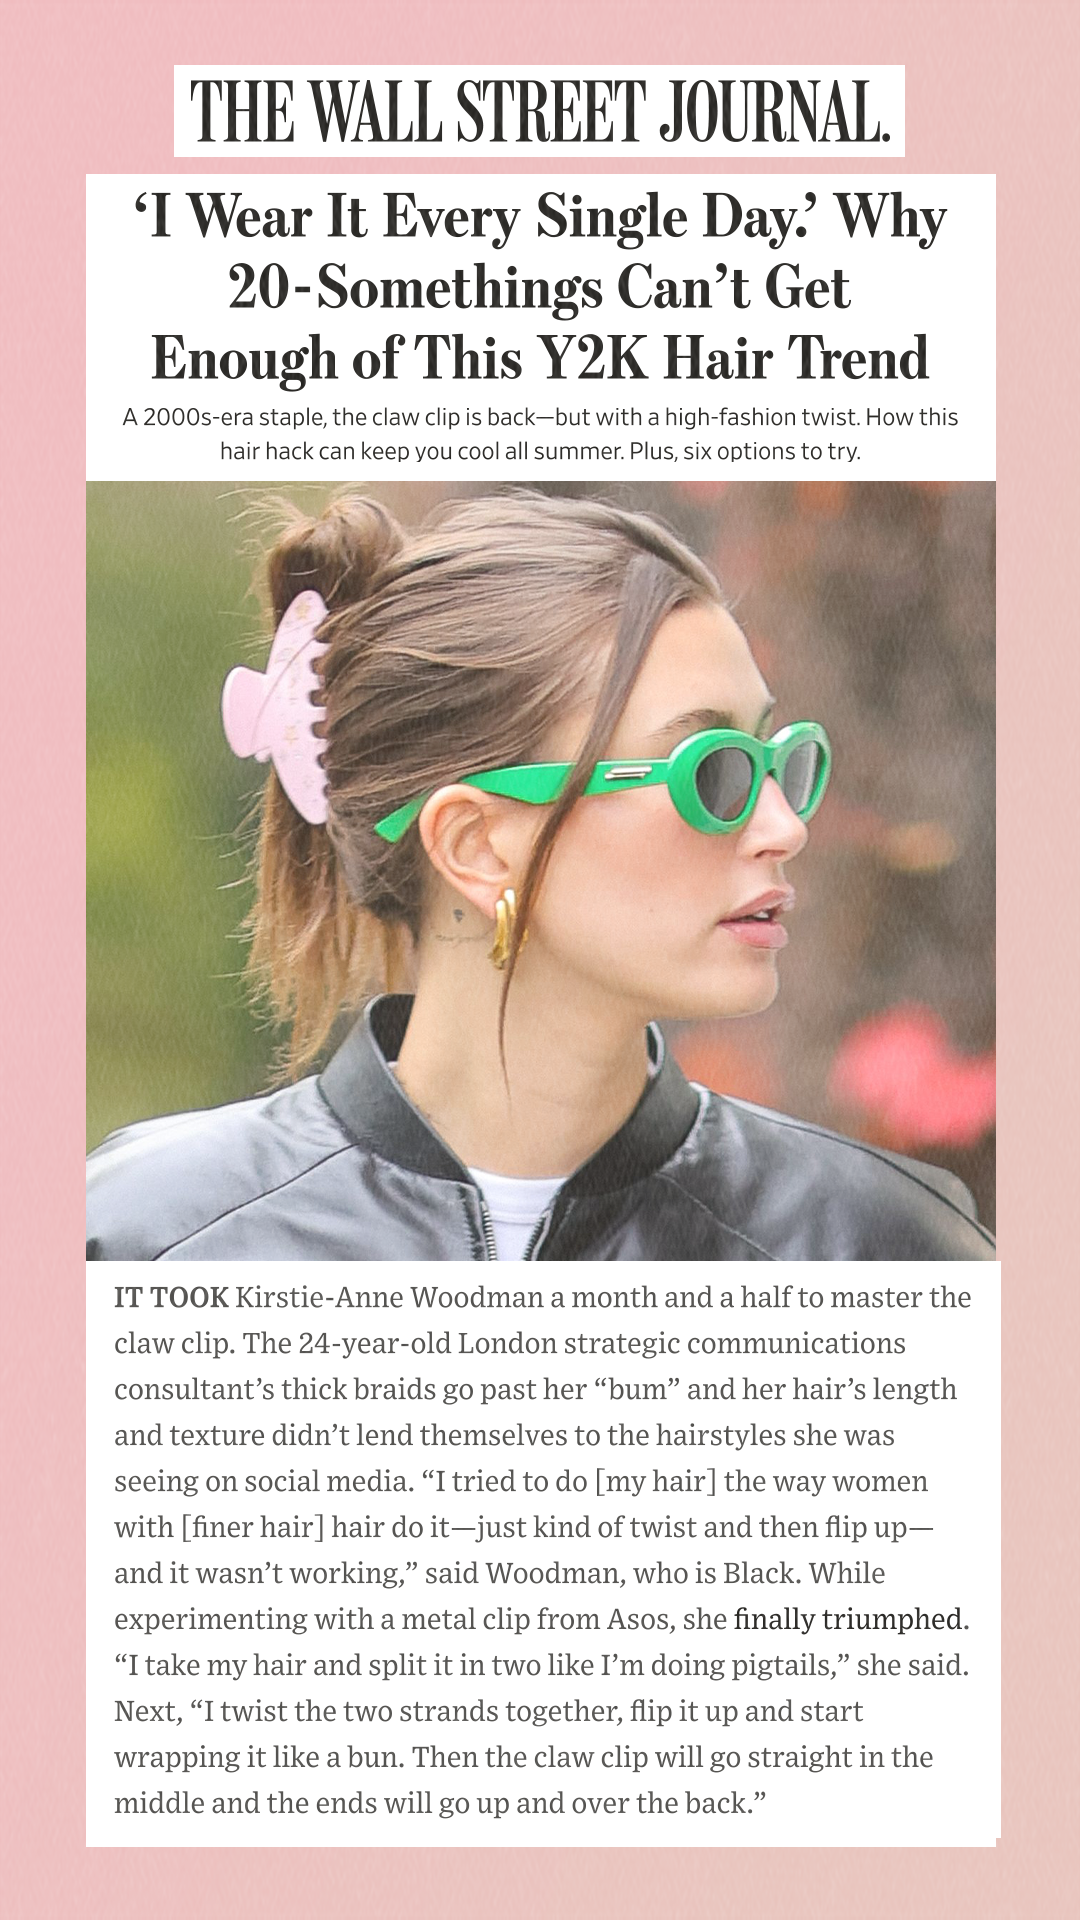 ‘I Wear It Every Single Day.’ Why 20-Somethings Can’t Get Enough of This Y2K Hair Trend A 2000s-era staple, the claw clip is back—but with a high-fashion twist. How this hair hack can keep you cool all summer. Plus, six options to try. IT TOOK Kirstie-Anne Woodman a month and a half to master the claw clip. The 24-year-old London strategic communications consultant’s thick braids go past her bum and her hair’s length and texture didn’t lend themselves to the hairstyles she was seeing on social media. I tried to do [my hair] the way women with [finer hair] hair do it—just kind of twist and then flip up—and it wasn’t working, said Woodman, who is Black. While experimenting with a metal clip from Asos, she finally triumphed. I take my hair and split it in two like I’m doing pigtails, she said. Next, I twist the two strands together, flip it up and start wrapping it like a bun. Then the claw clip will go straight in the middle and the ends will go up and over the back.